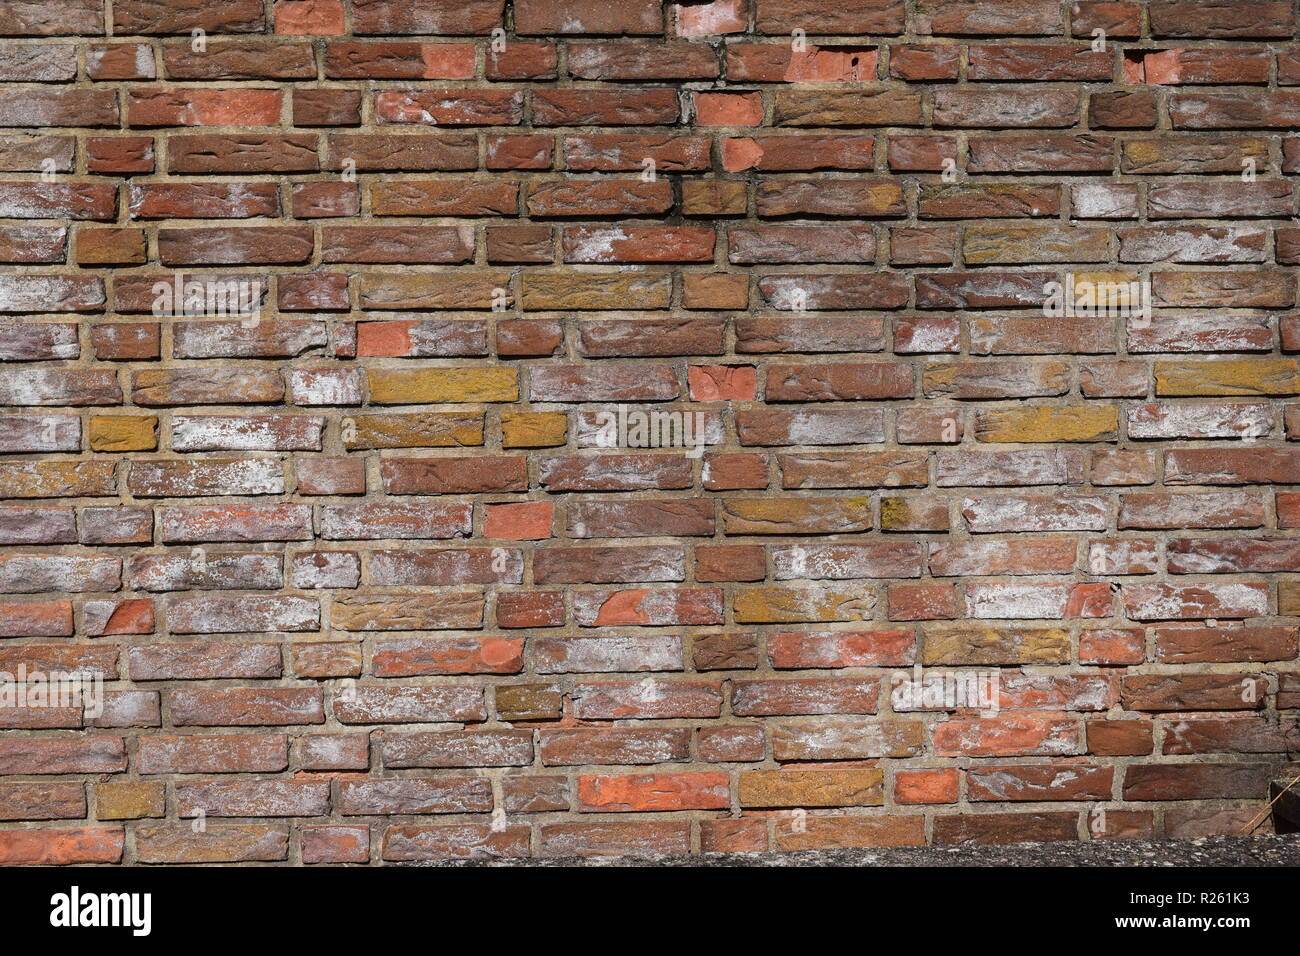 Old red brick wall showing signs of age and decay mortar. Stock Photo